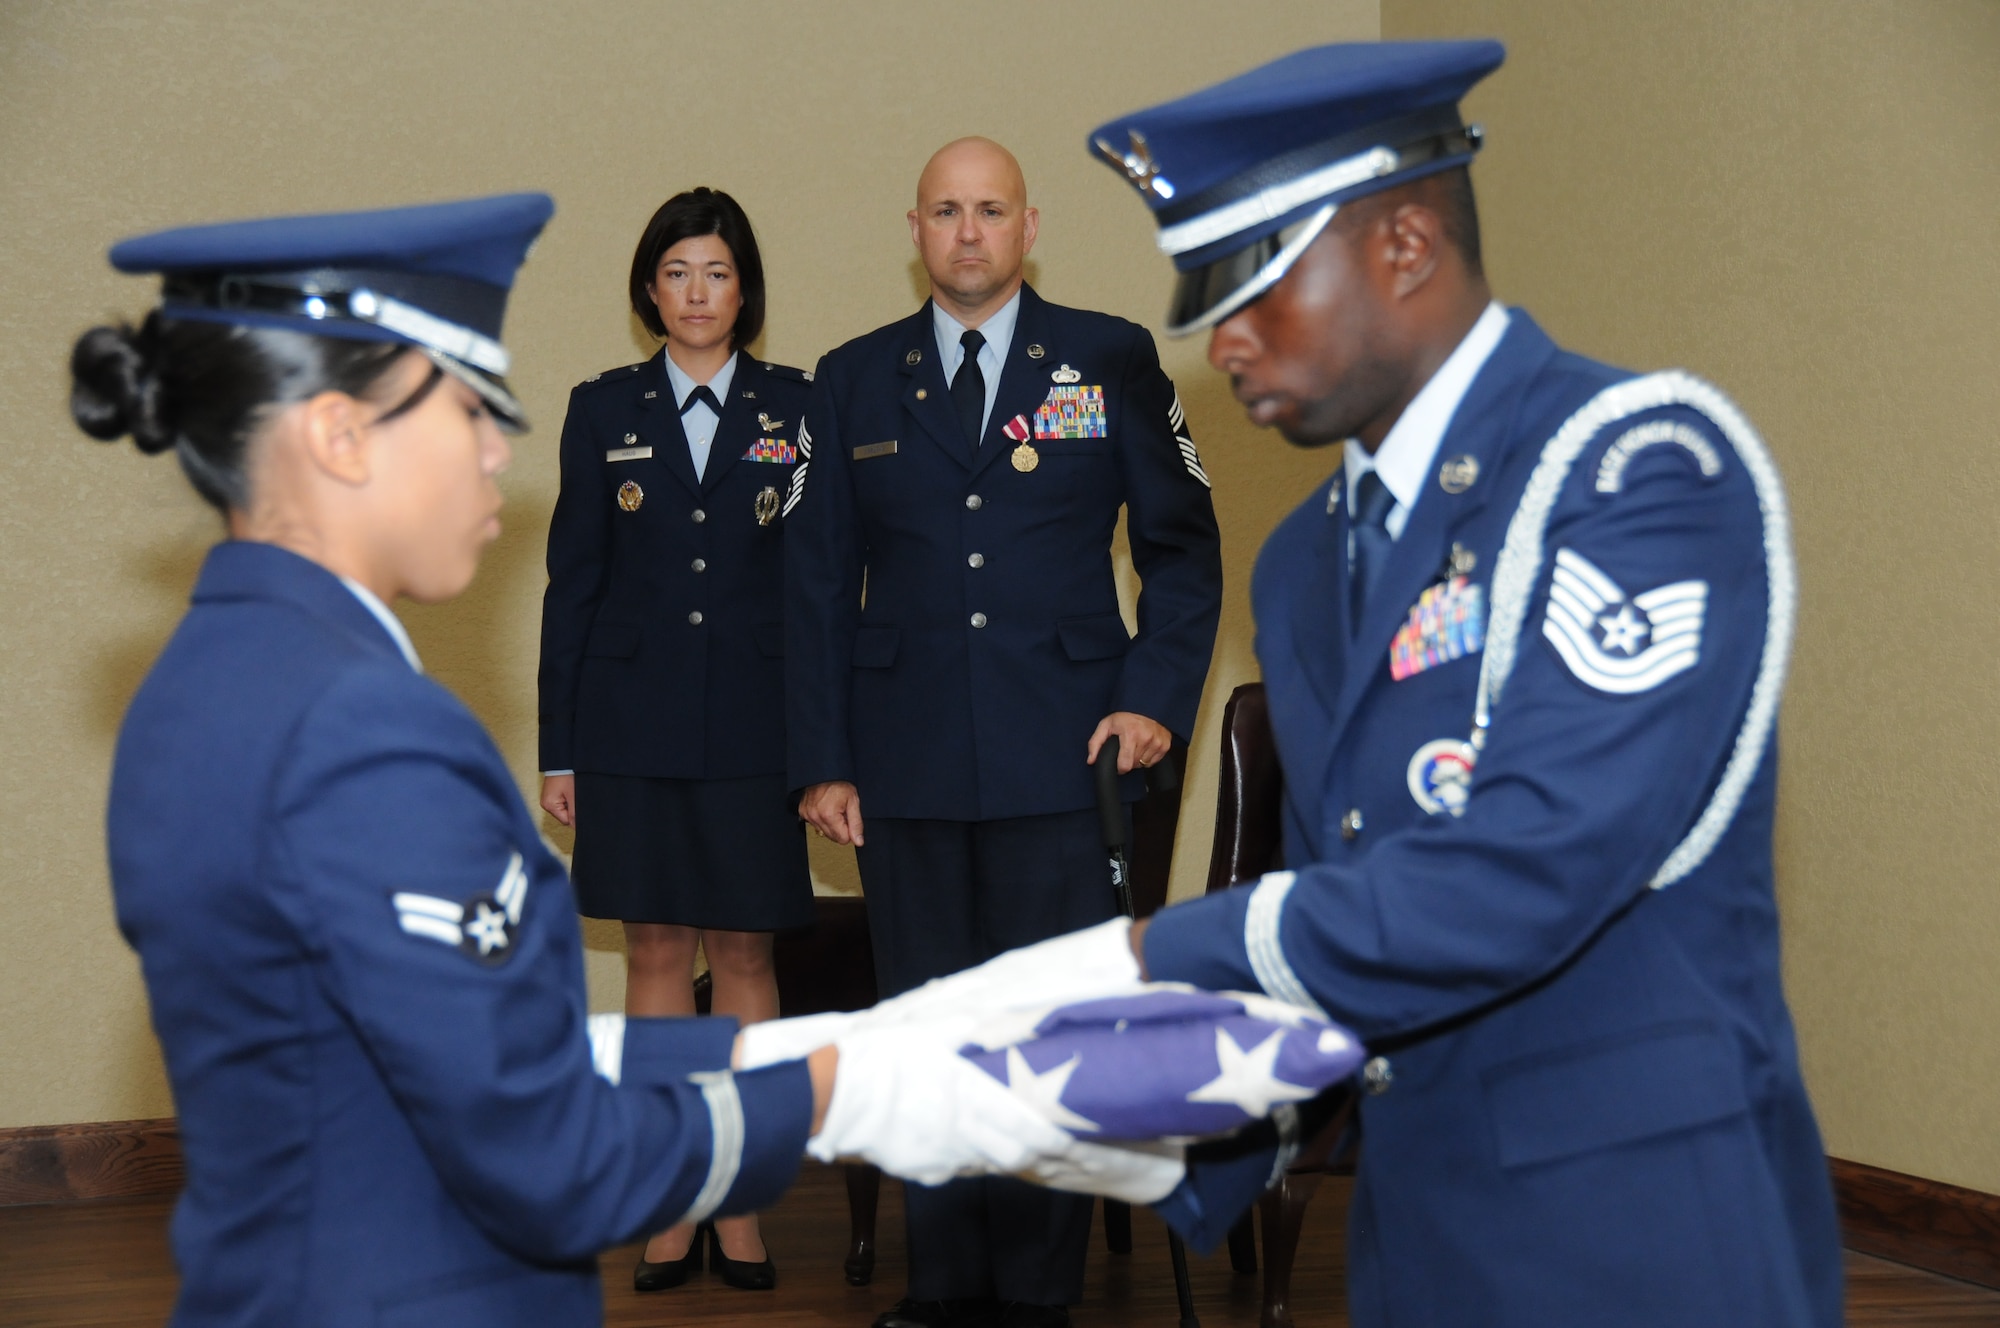 Airman 1st Class Candace Thompson and Tech. Sgt. James Shealey fold the American flag as Lt. Col. Janet Haug, 81st Training Support Squadron commander, and Chief Orslene, squadron superintendent, look on during the chief’s retirement ceremony Monday at the Bay Breeze Event Center.  (U.S. Air Force photo by Kemberly Groue)